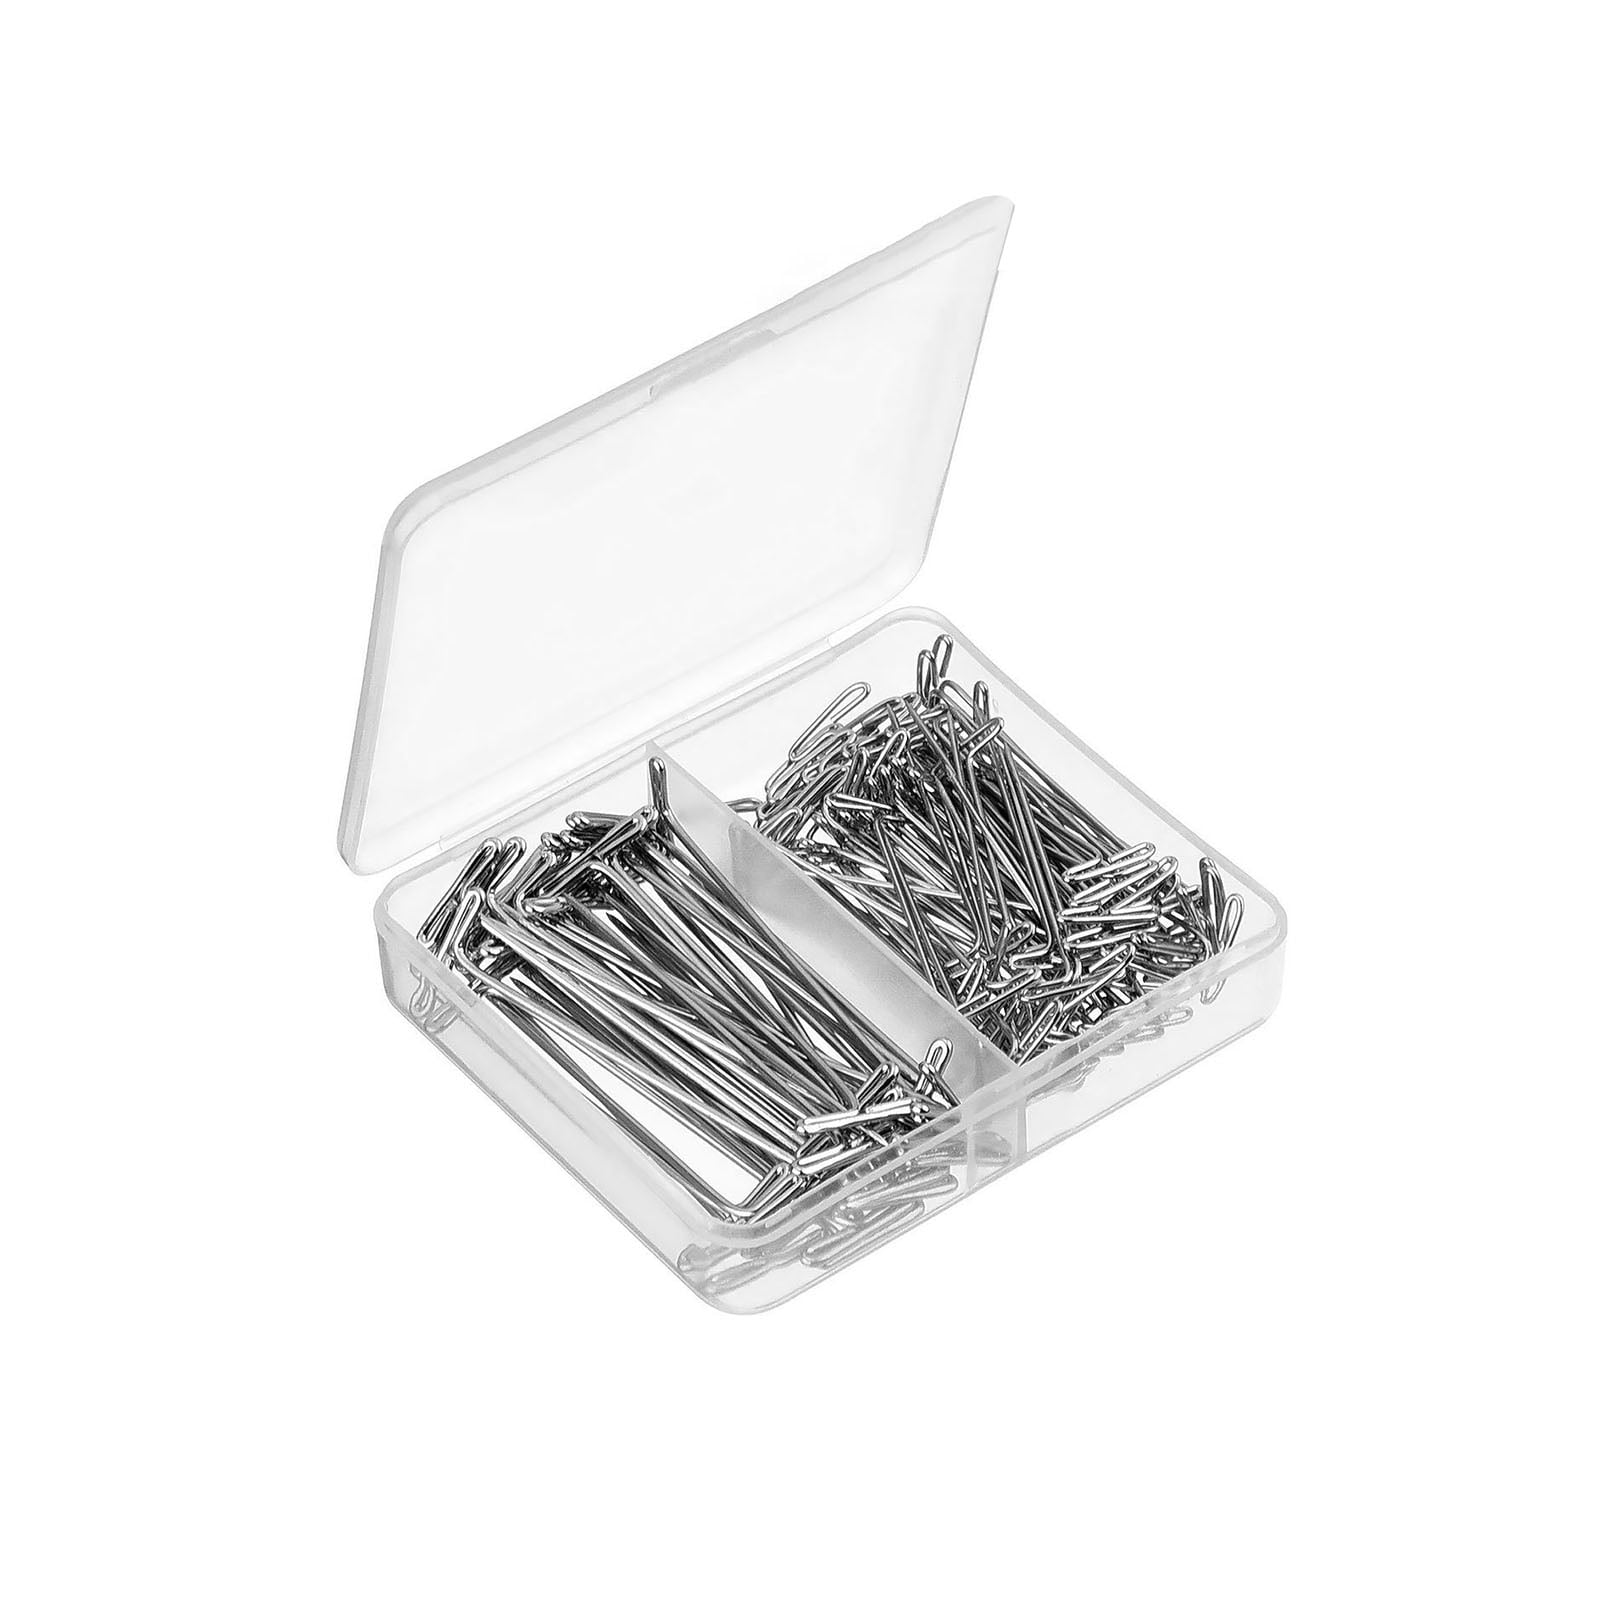 Crocheting 150 Pieces T Pins T Shape Sewing Pins Wig Making Pins Needles Set Stainless Steel Push Pin Kit with Clear Box and Soft Tape Measure 60 Inch for Wigs and Crafts for Knitting Modeling 